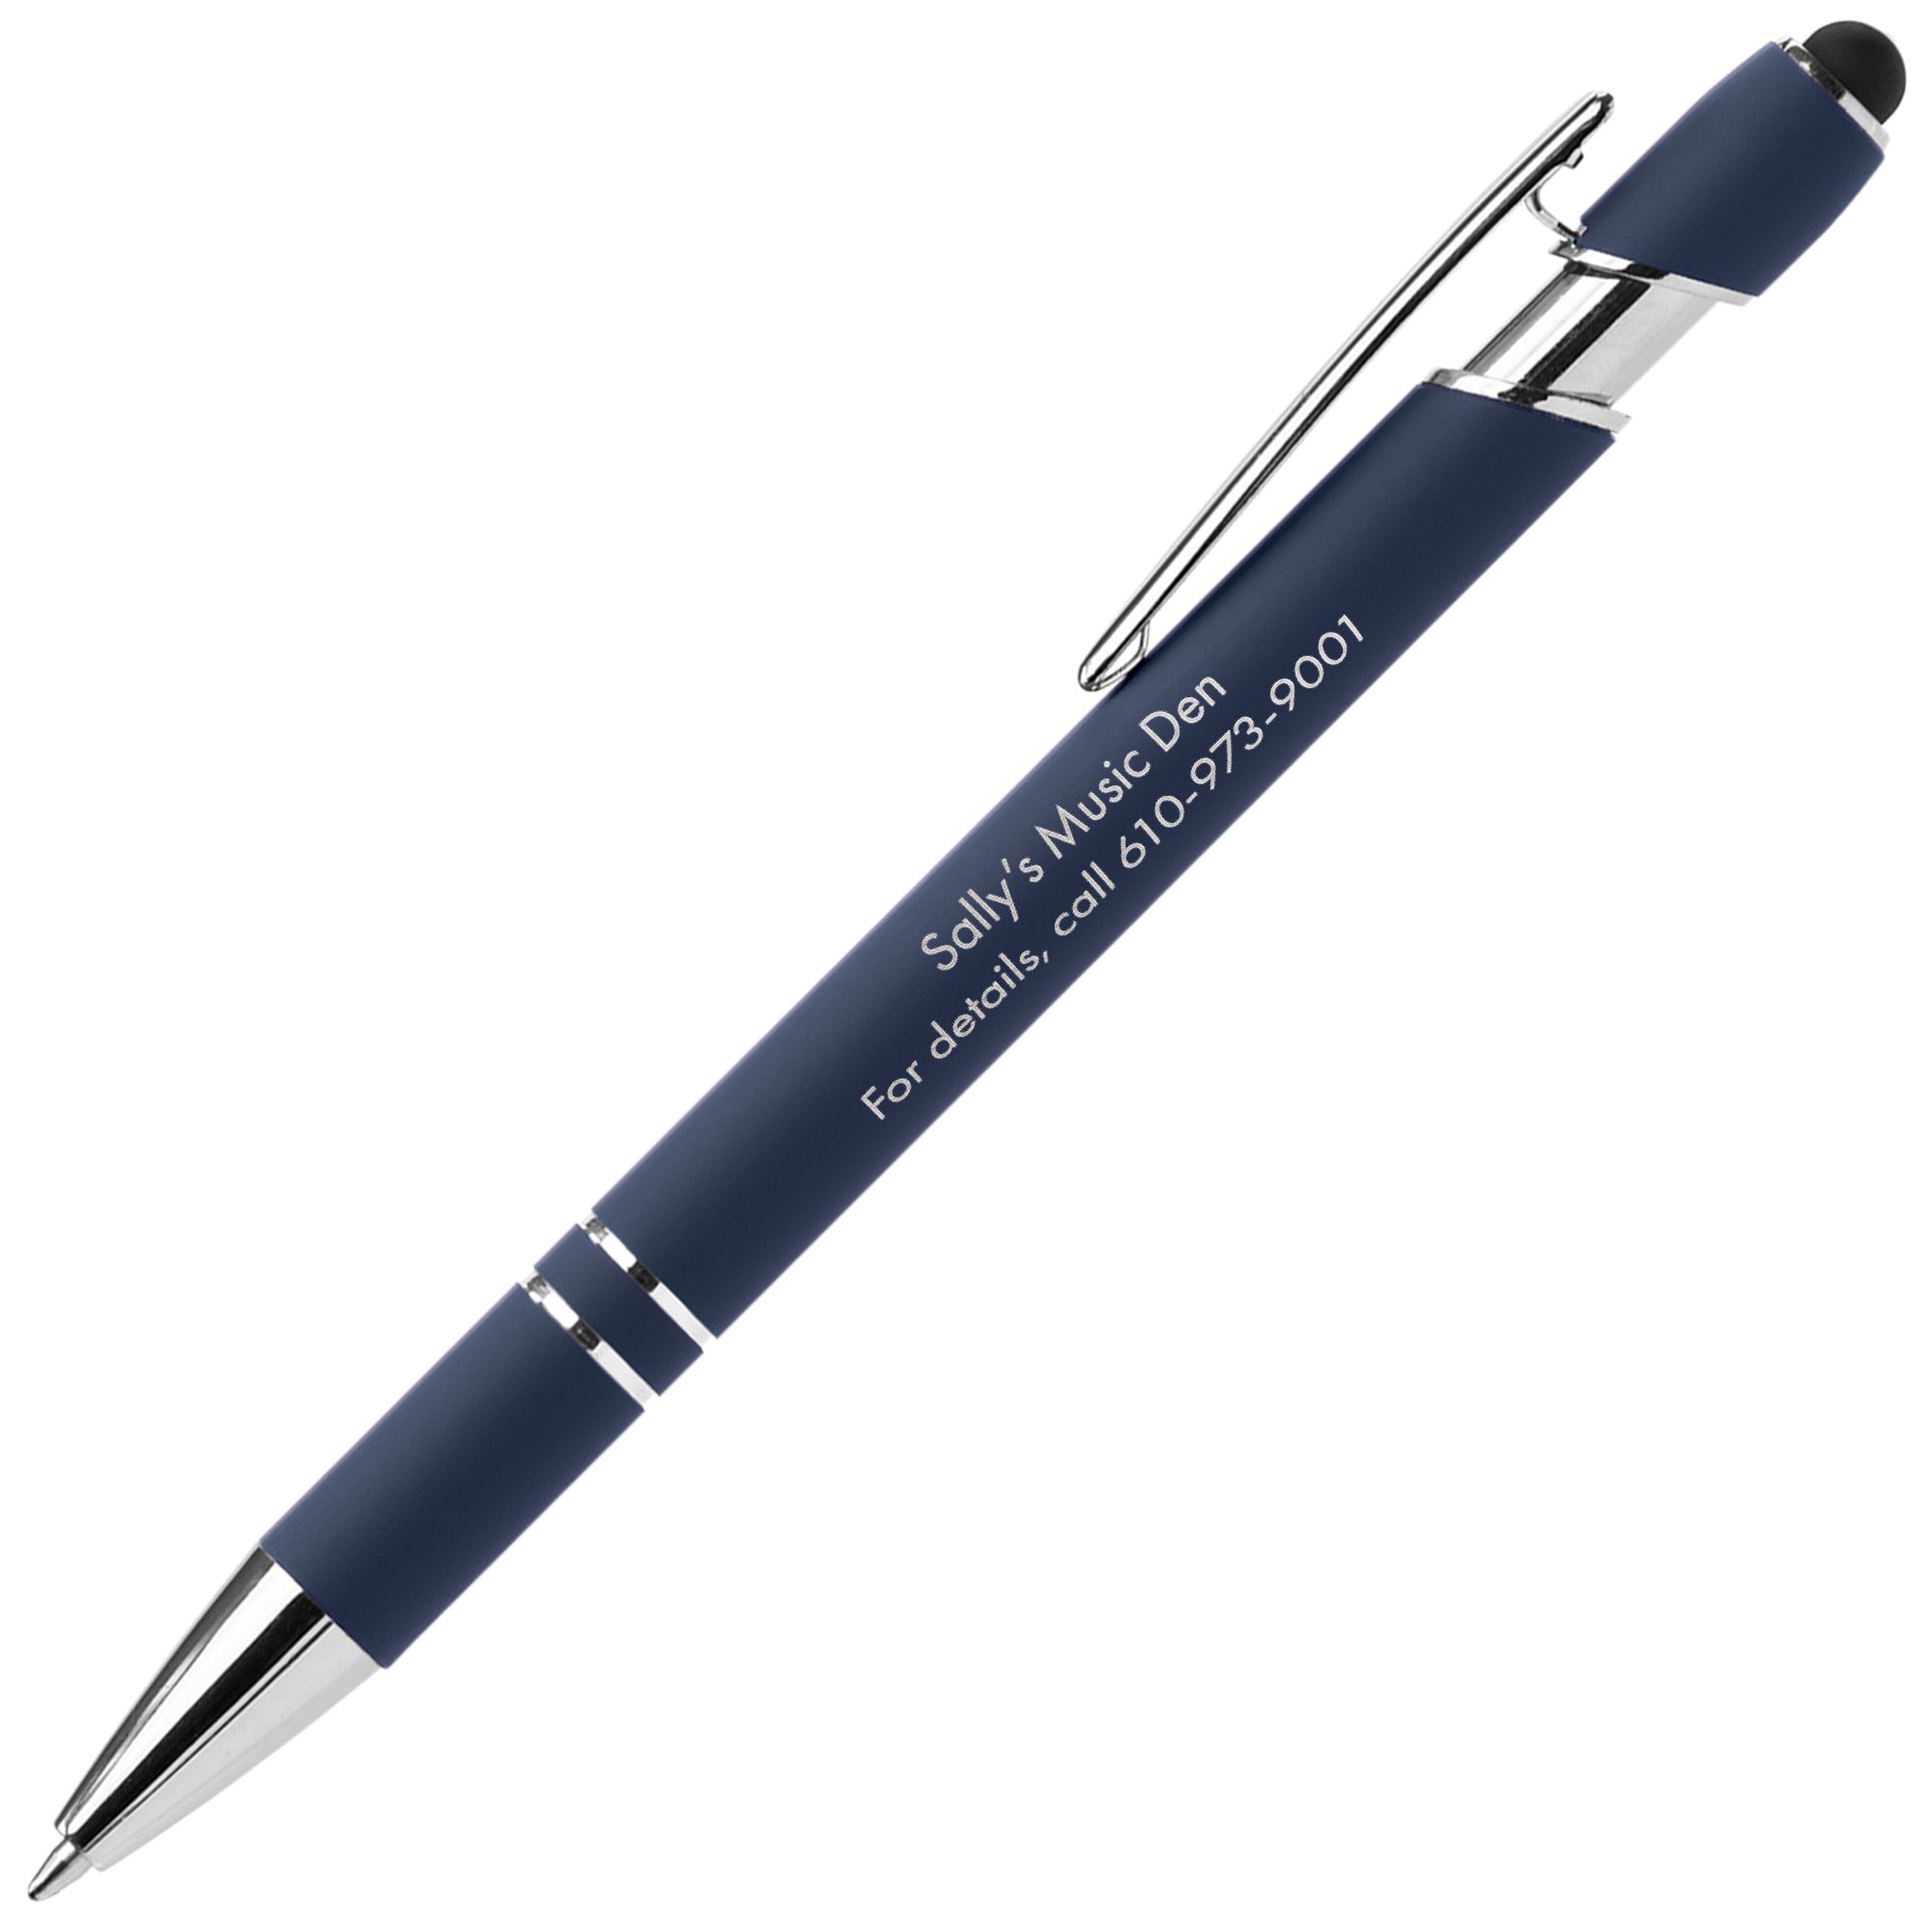 National pen promotional products